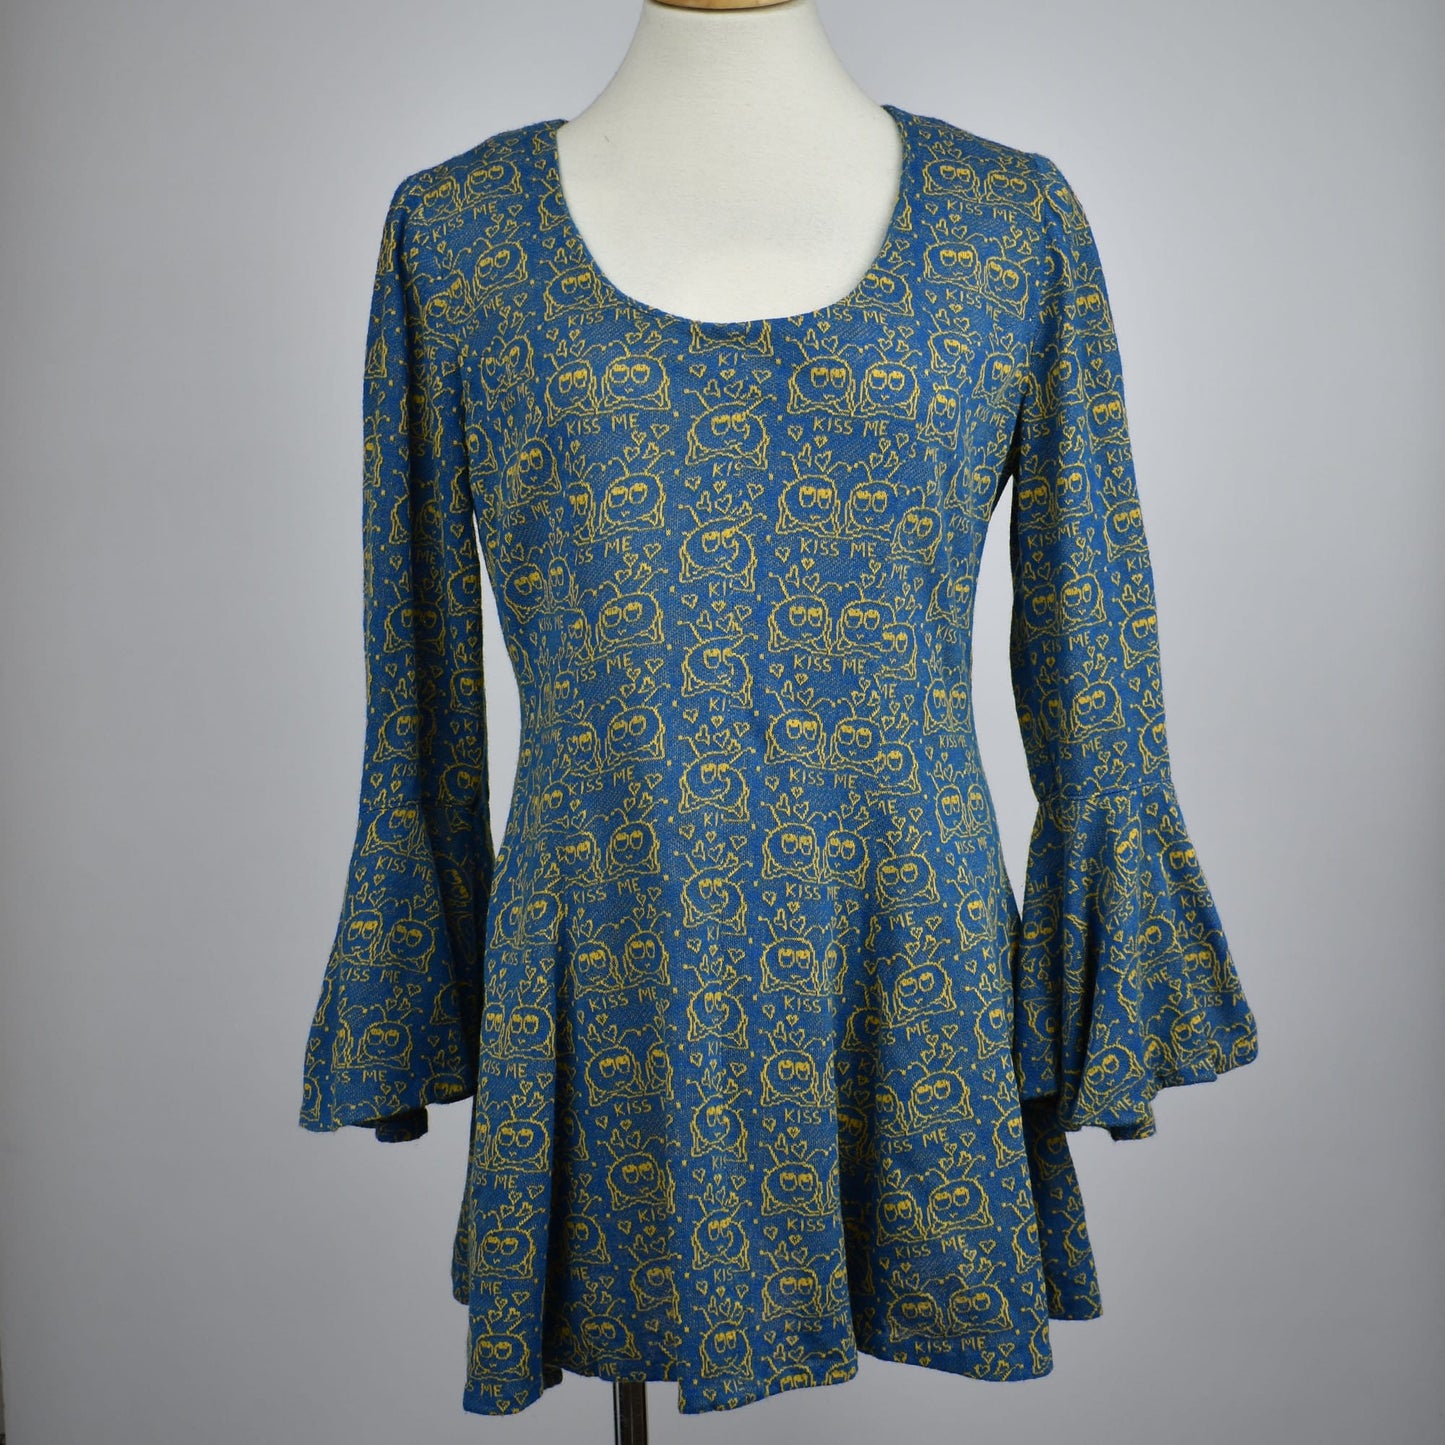 Vintage 70s Intarsia Knit "Kiss Me" Bugs in Love - Mini Dress with Circular Flounce Sleeves in Blue and Yellow